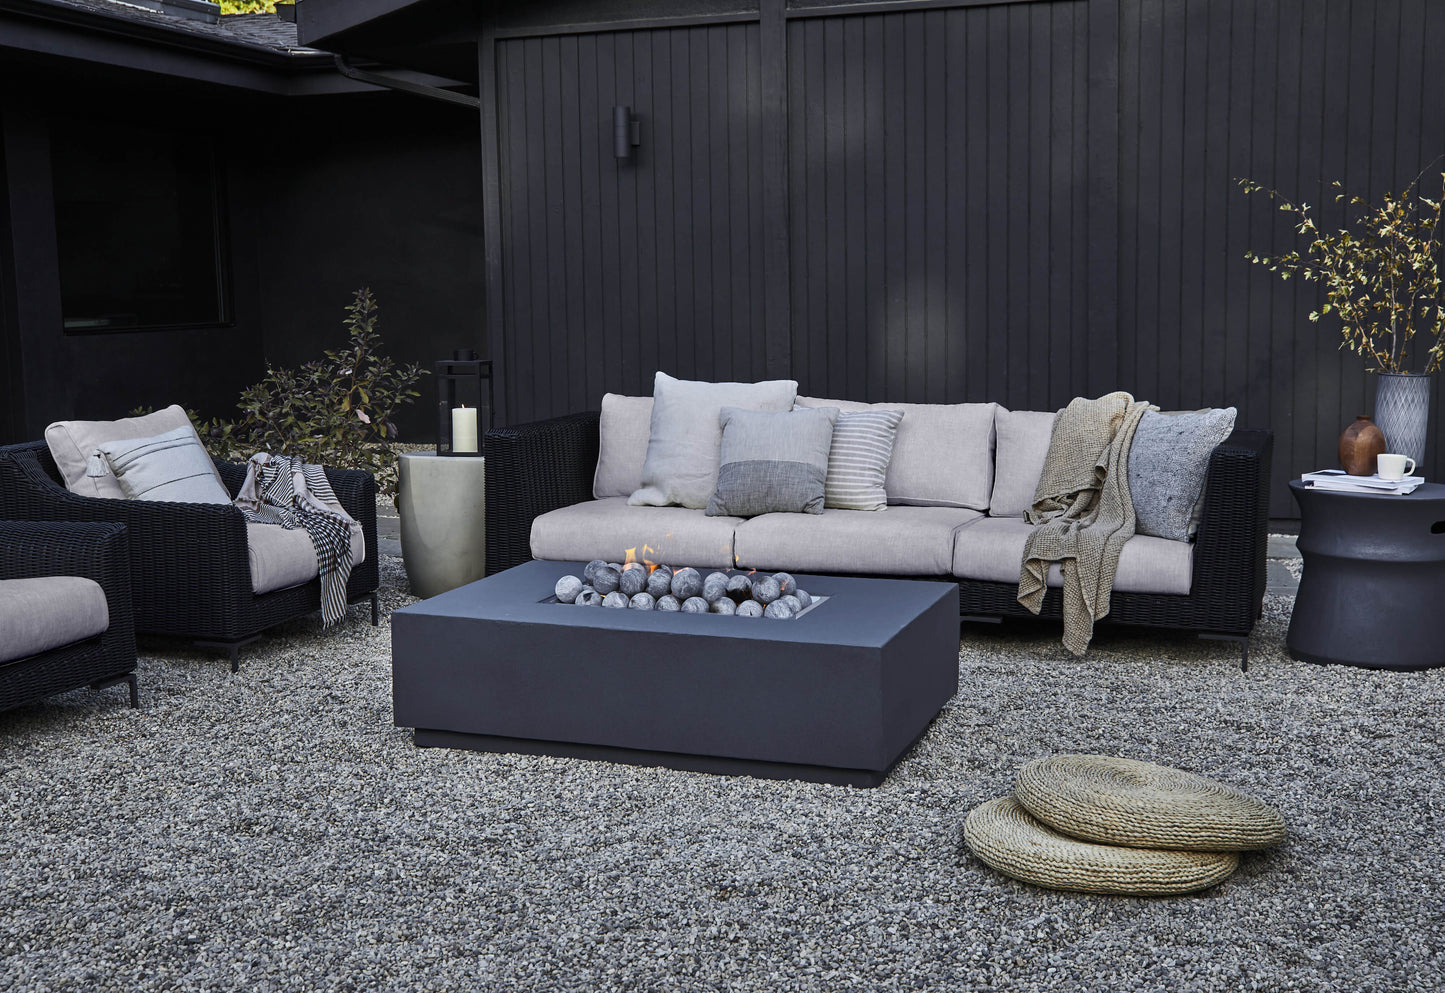 Live Outer 103" Black Wicker Outdoor Sofa With Armless Chairs & Sandstone Gray Cushion (5-Seat)